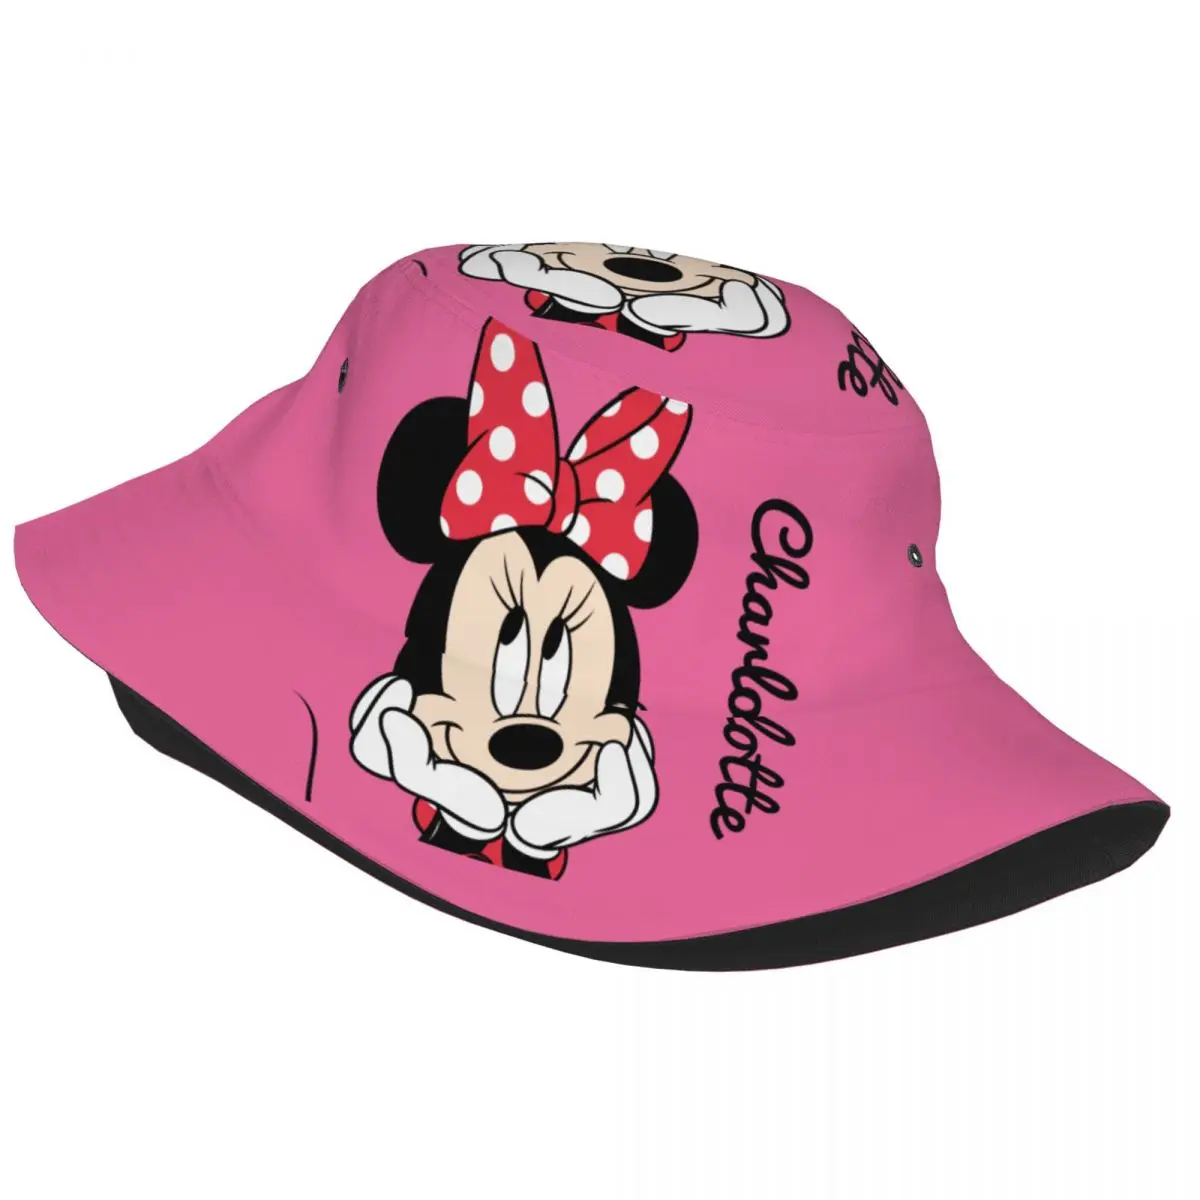 Red Minnie Head In Hands Bucket Hat Gift for Unisex Lovely Kawaii Vocation Caps For Travel Lightweight